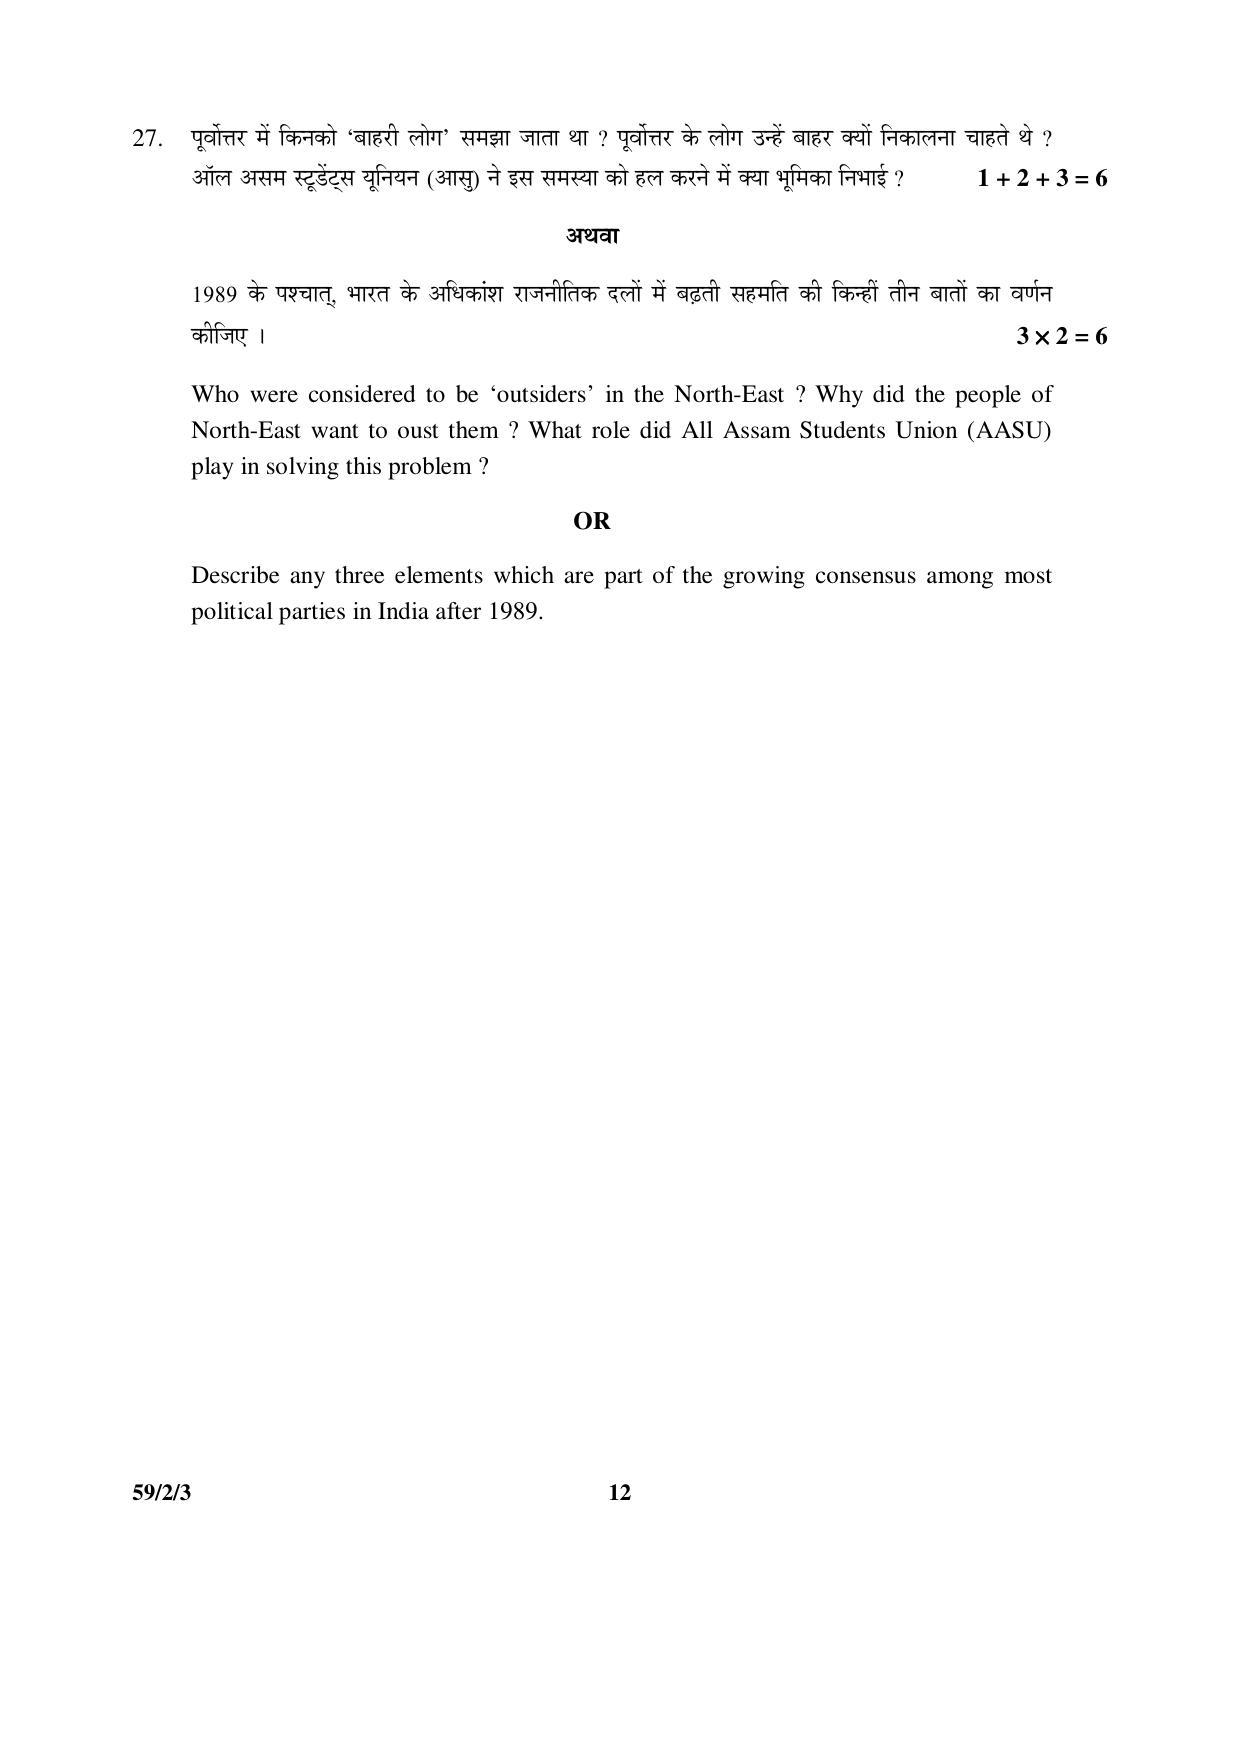 CBSE Class 12 59-2-3 _Political Science 2016 Question Paper - Page 12